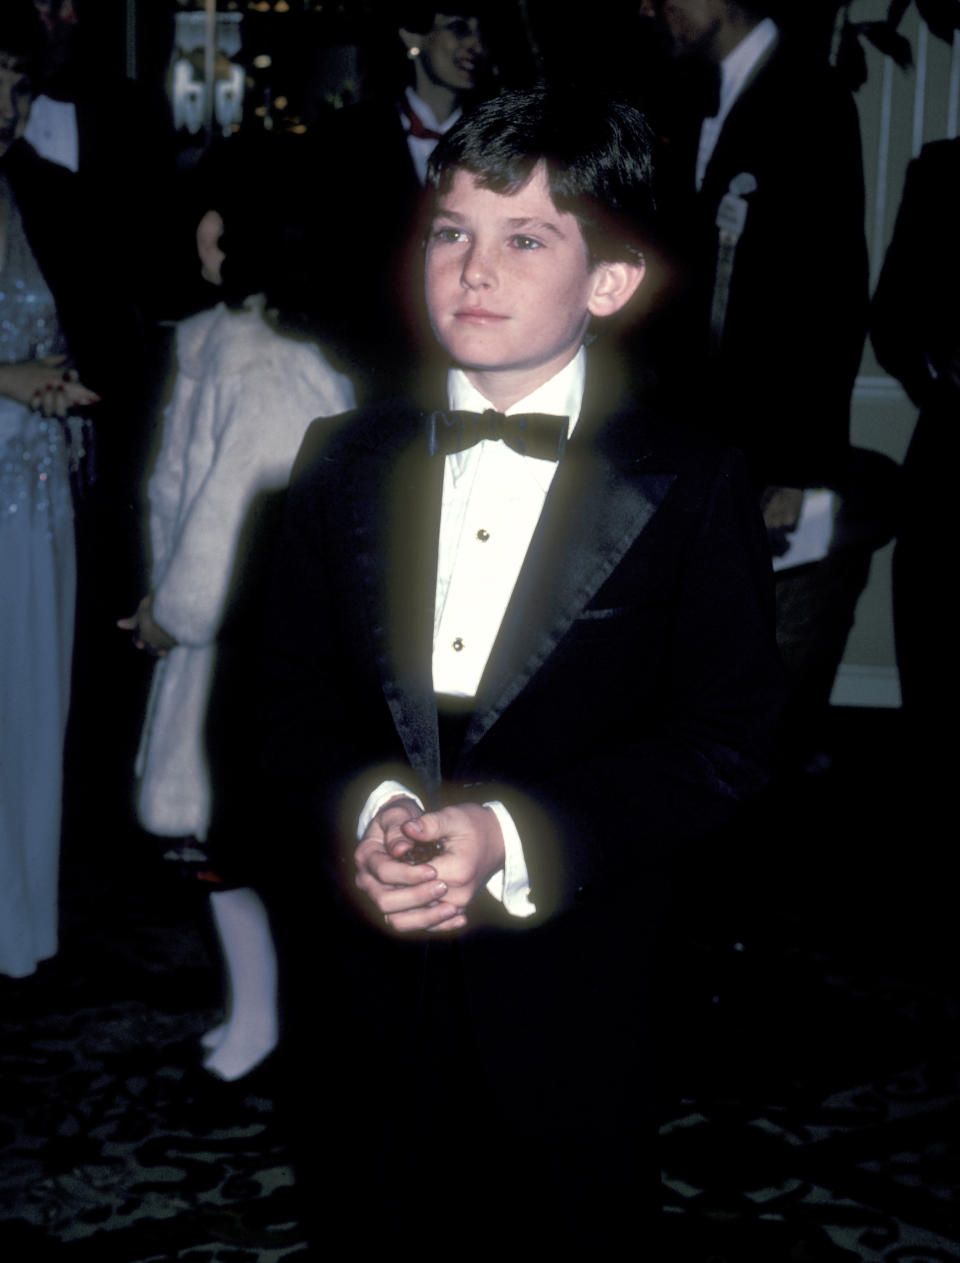 Actor Henry Thomas attends the 40th Annual Golden Globe Awards on January 29, 1983 at Beverly Hilton Hotel in Beverly Hills, California. (Photo by Ron Galella/Ron Galella Collection via Getty Images)